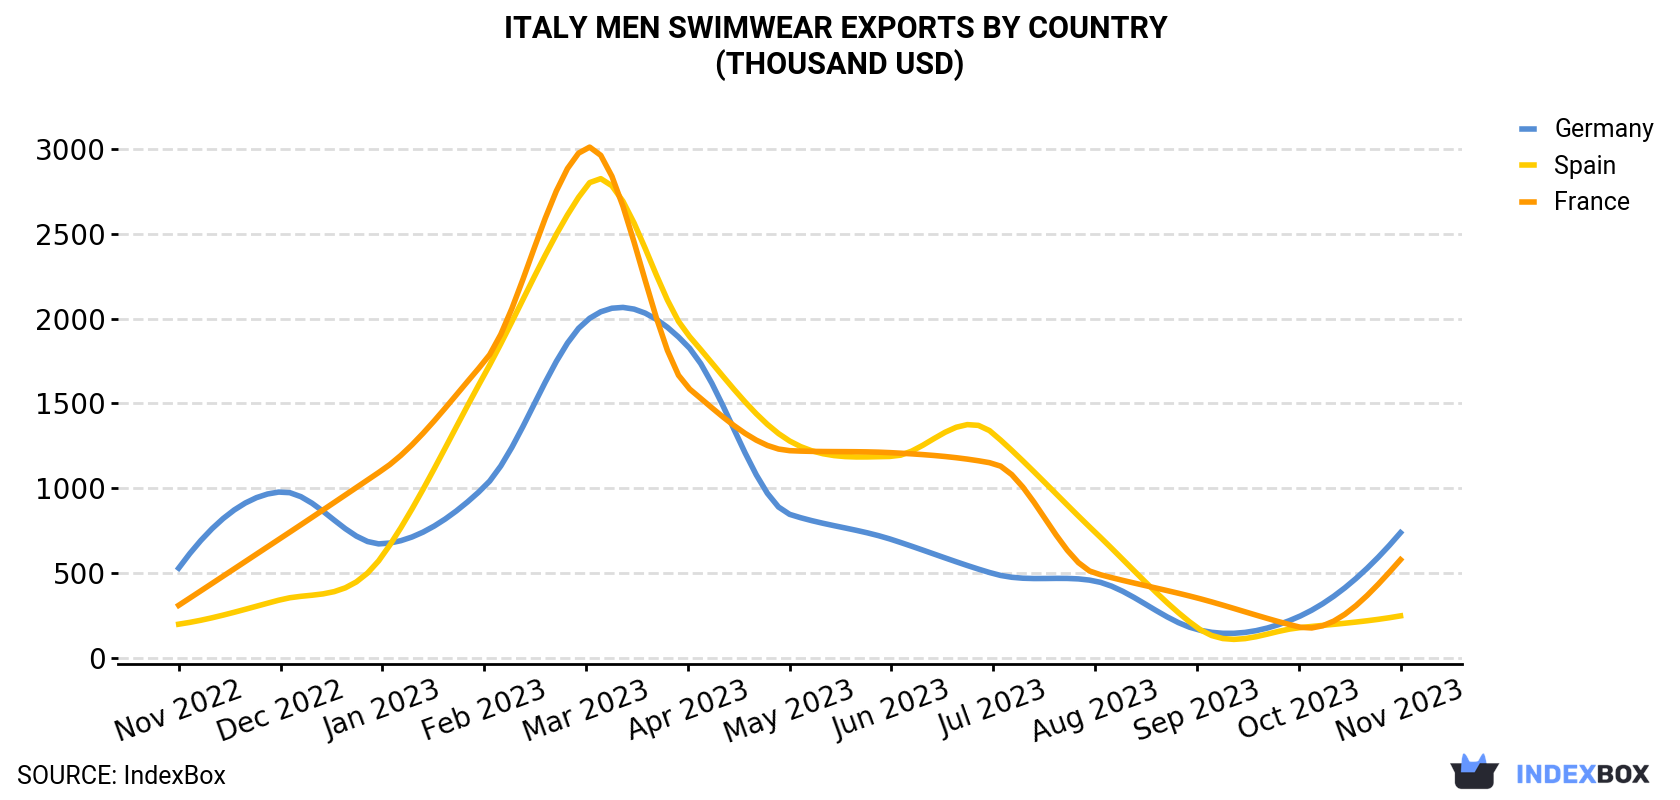 Italy Men Swimwear Exports By Country (Thousand USD)